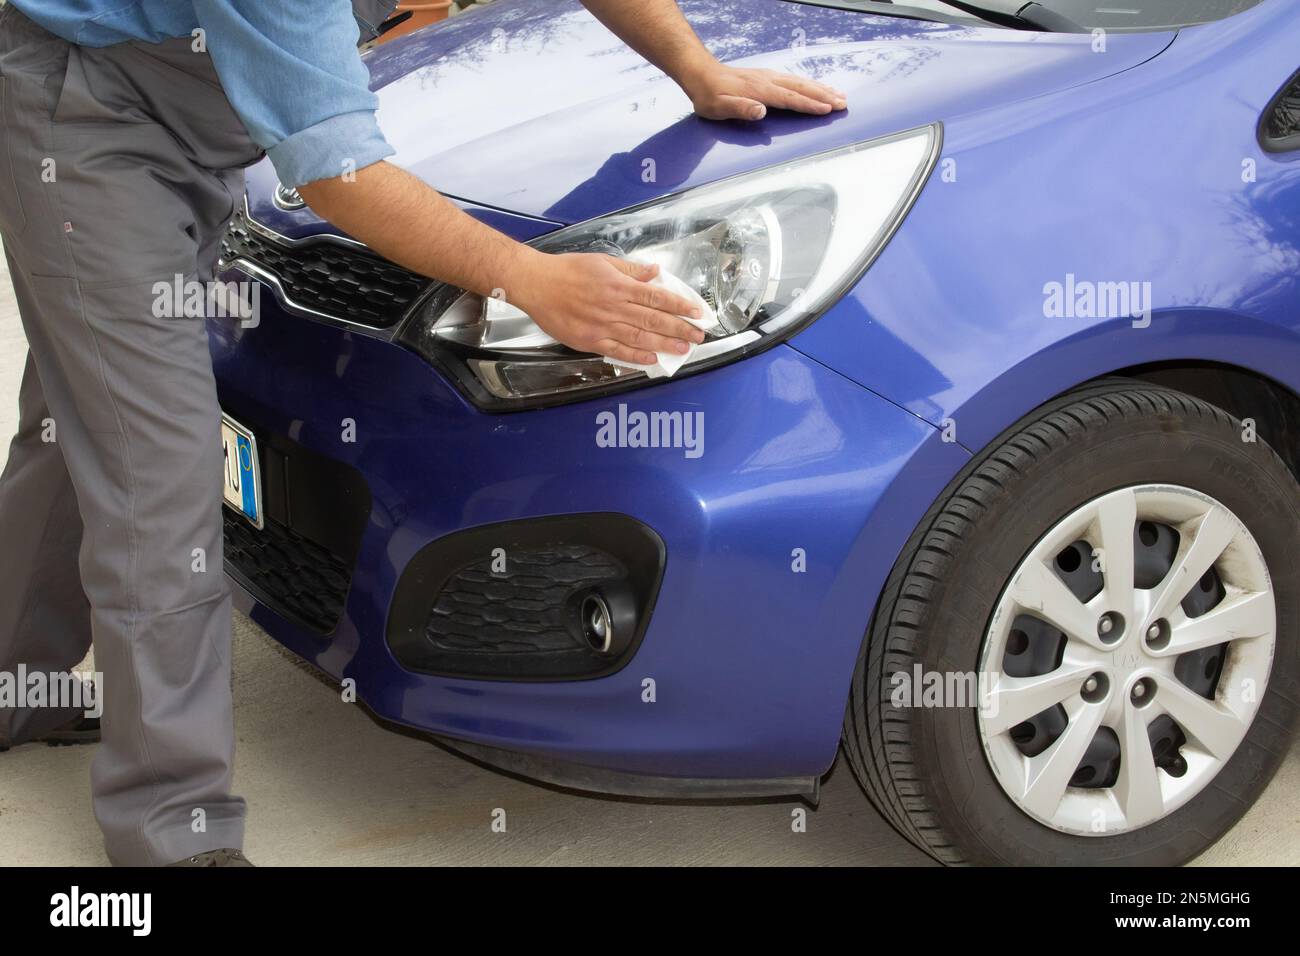 Image of a body shop while polishing the headlights of a car. Stock Photo